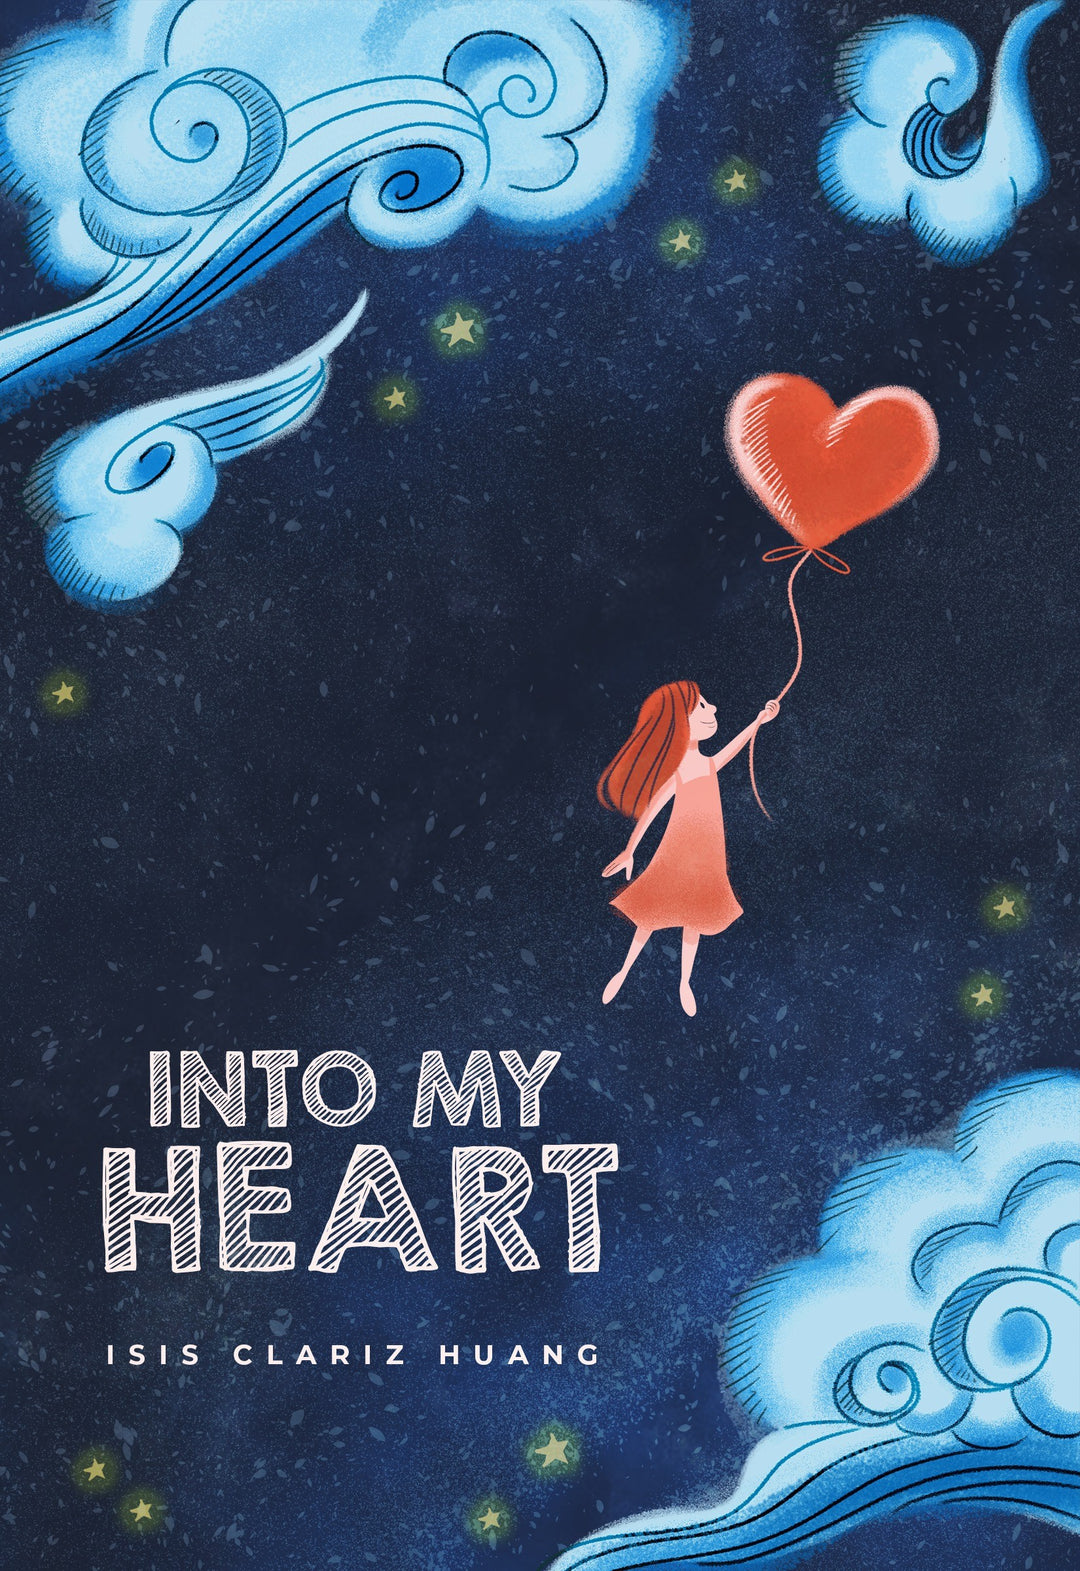 Into My Heart - A Collection of Love Poems by Isis Clariz Huang Digital Edition